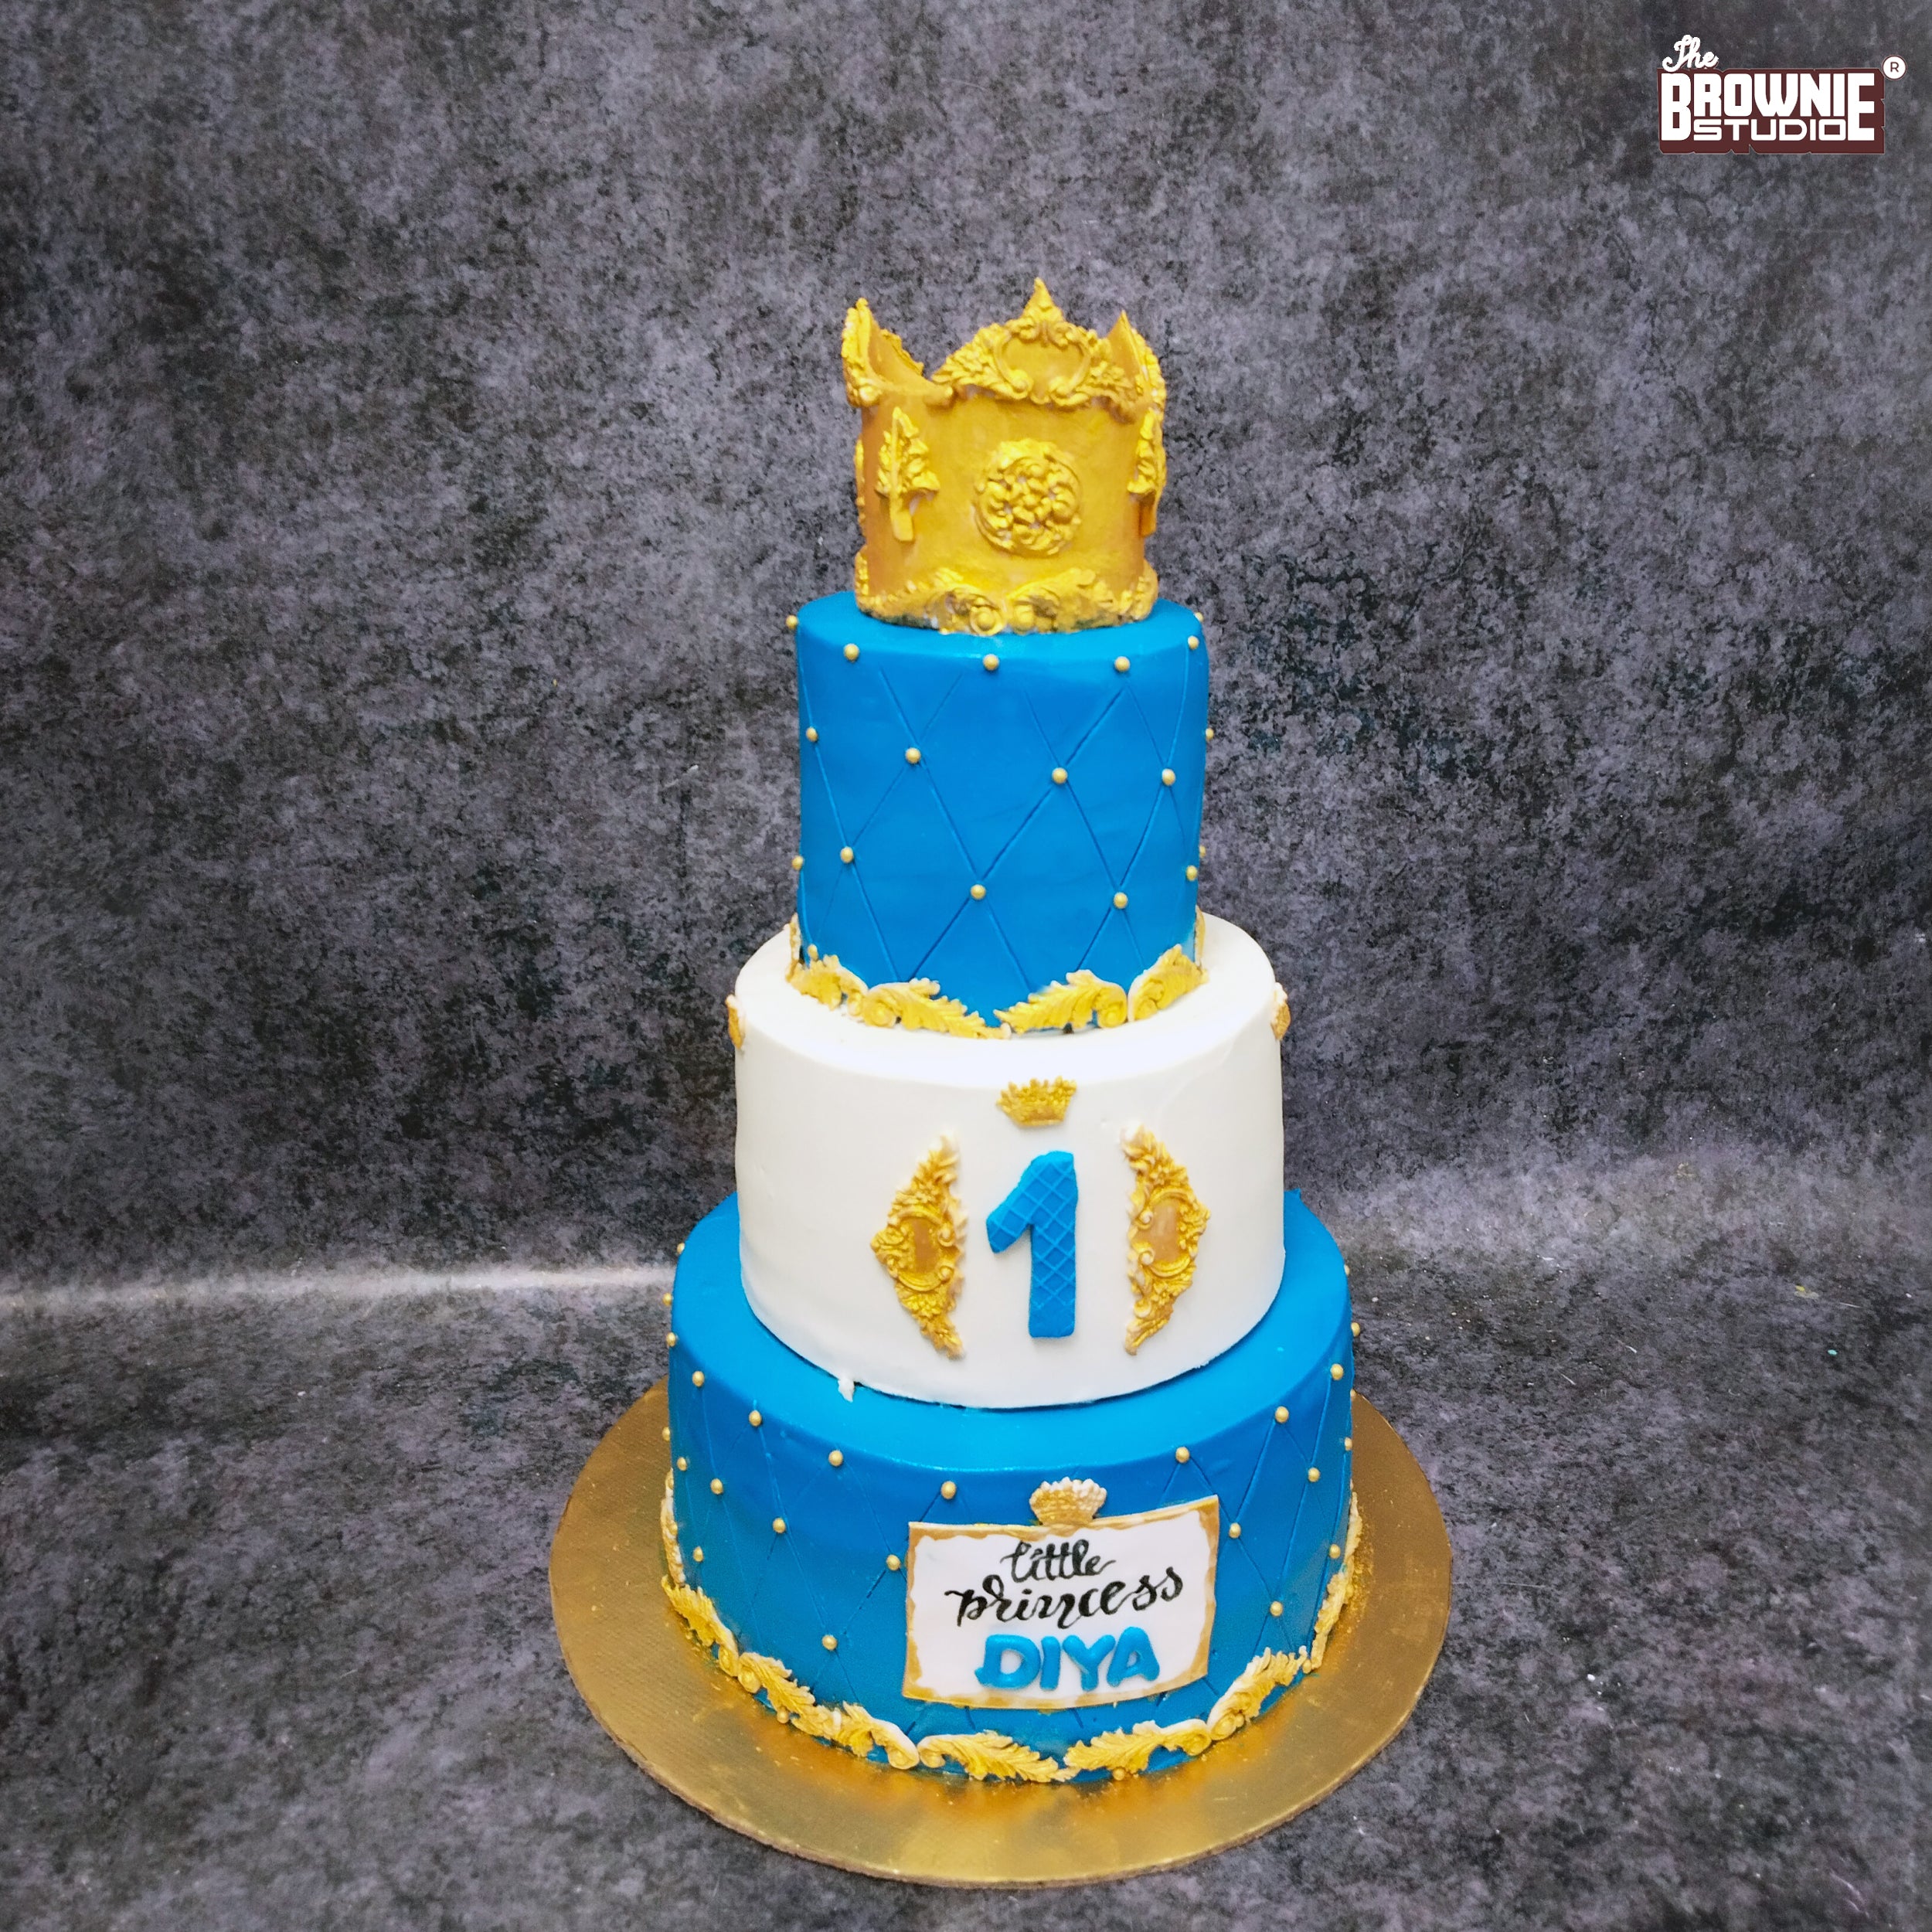 The Royal prince themed cake 👑 to... - Swati's Cakes LLC | Facebook